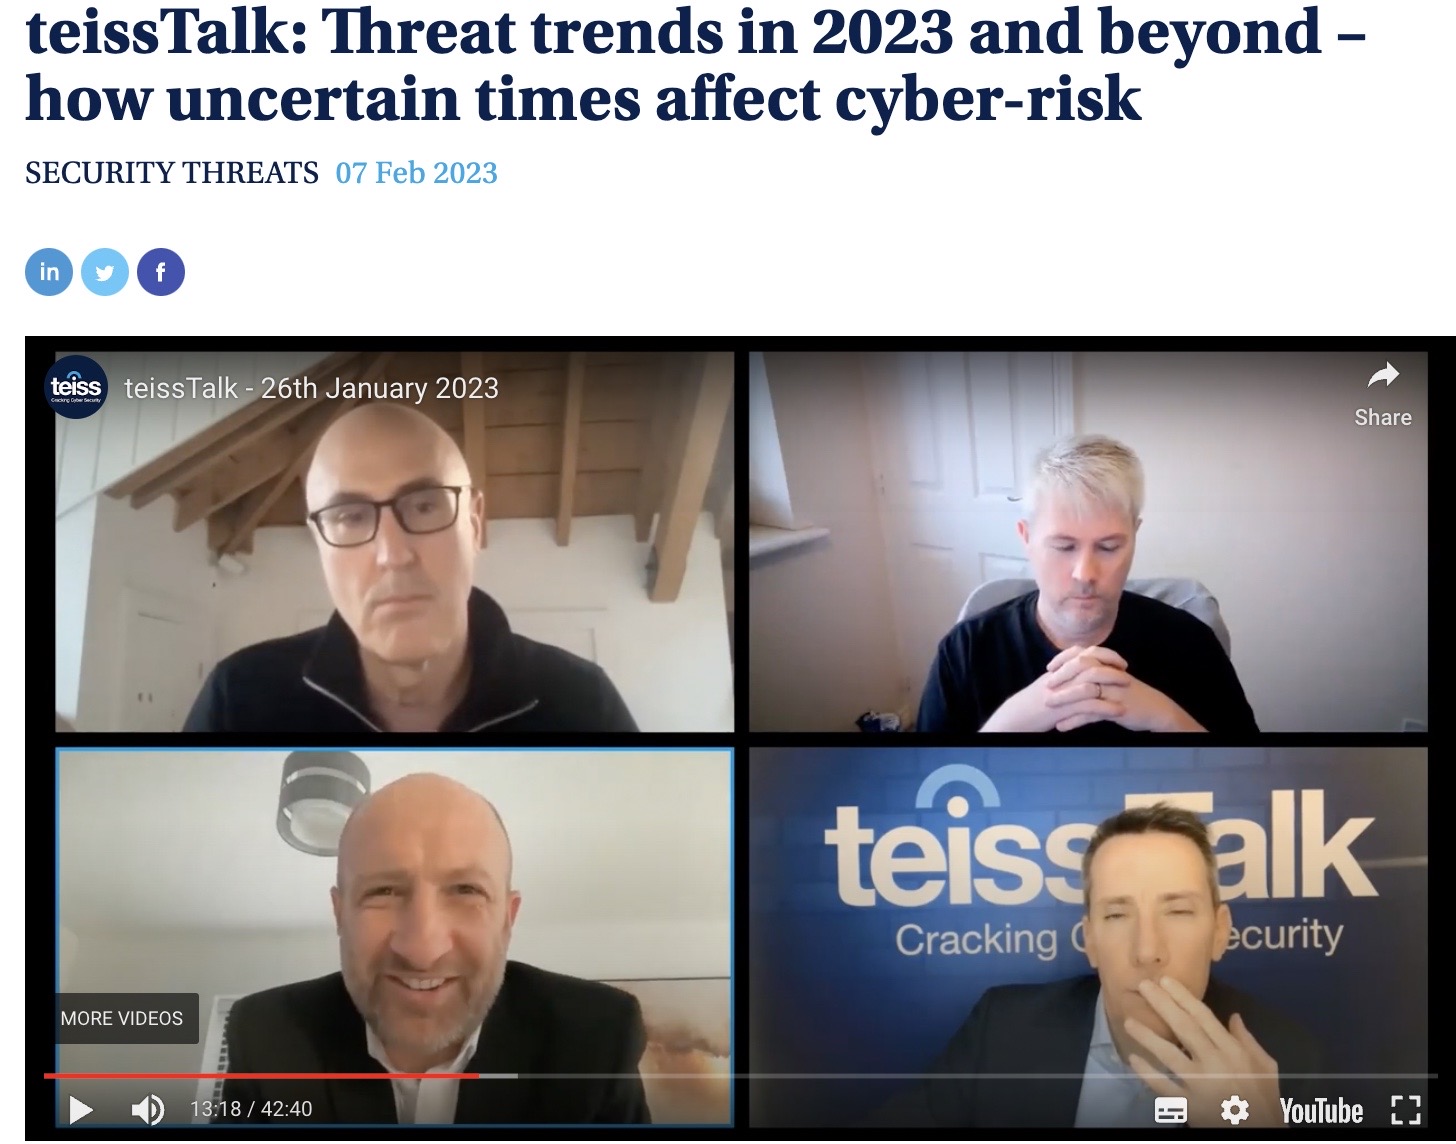 Professor Kevin Curran, Ulster University in an interview on the award winning cybersecurity podcast teissTalk about the cyberthreat landscape for 2023 along with Todd Wade, CISO, Lloyds Intelligence & Jamie Moles, ExtraHop.